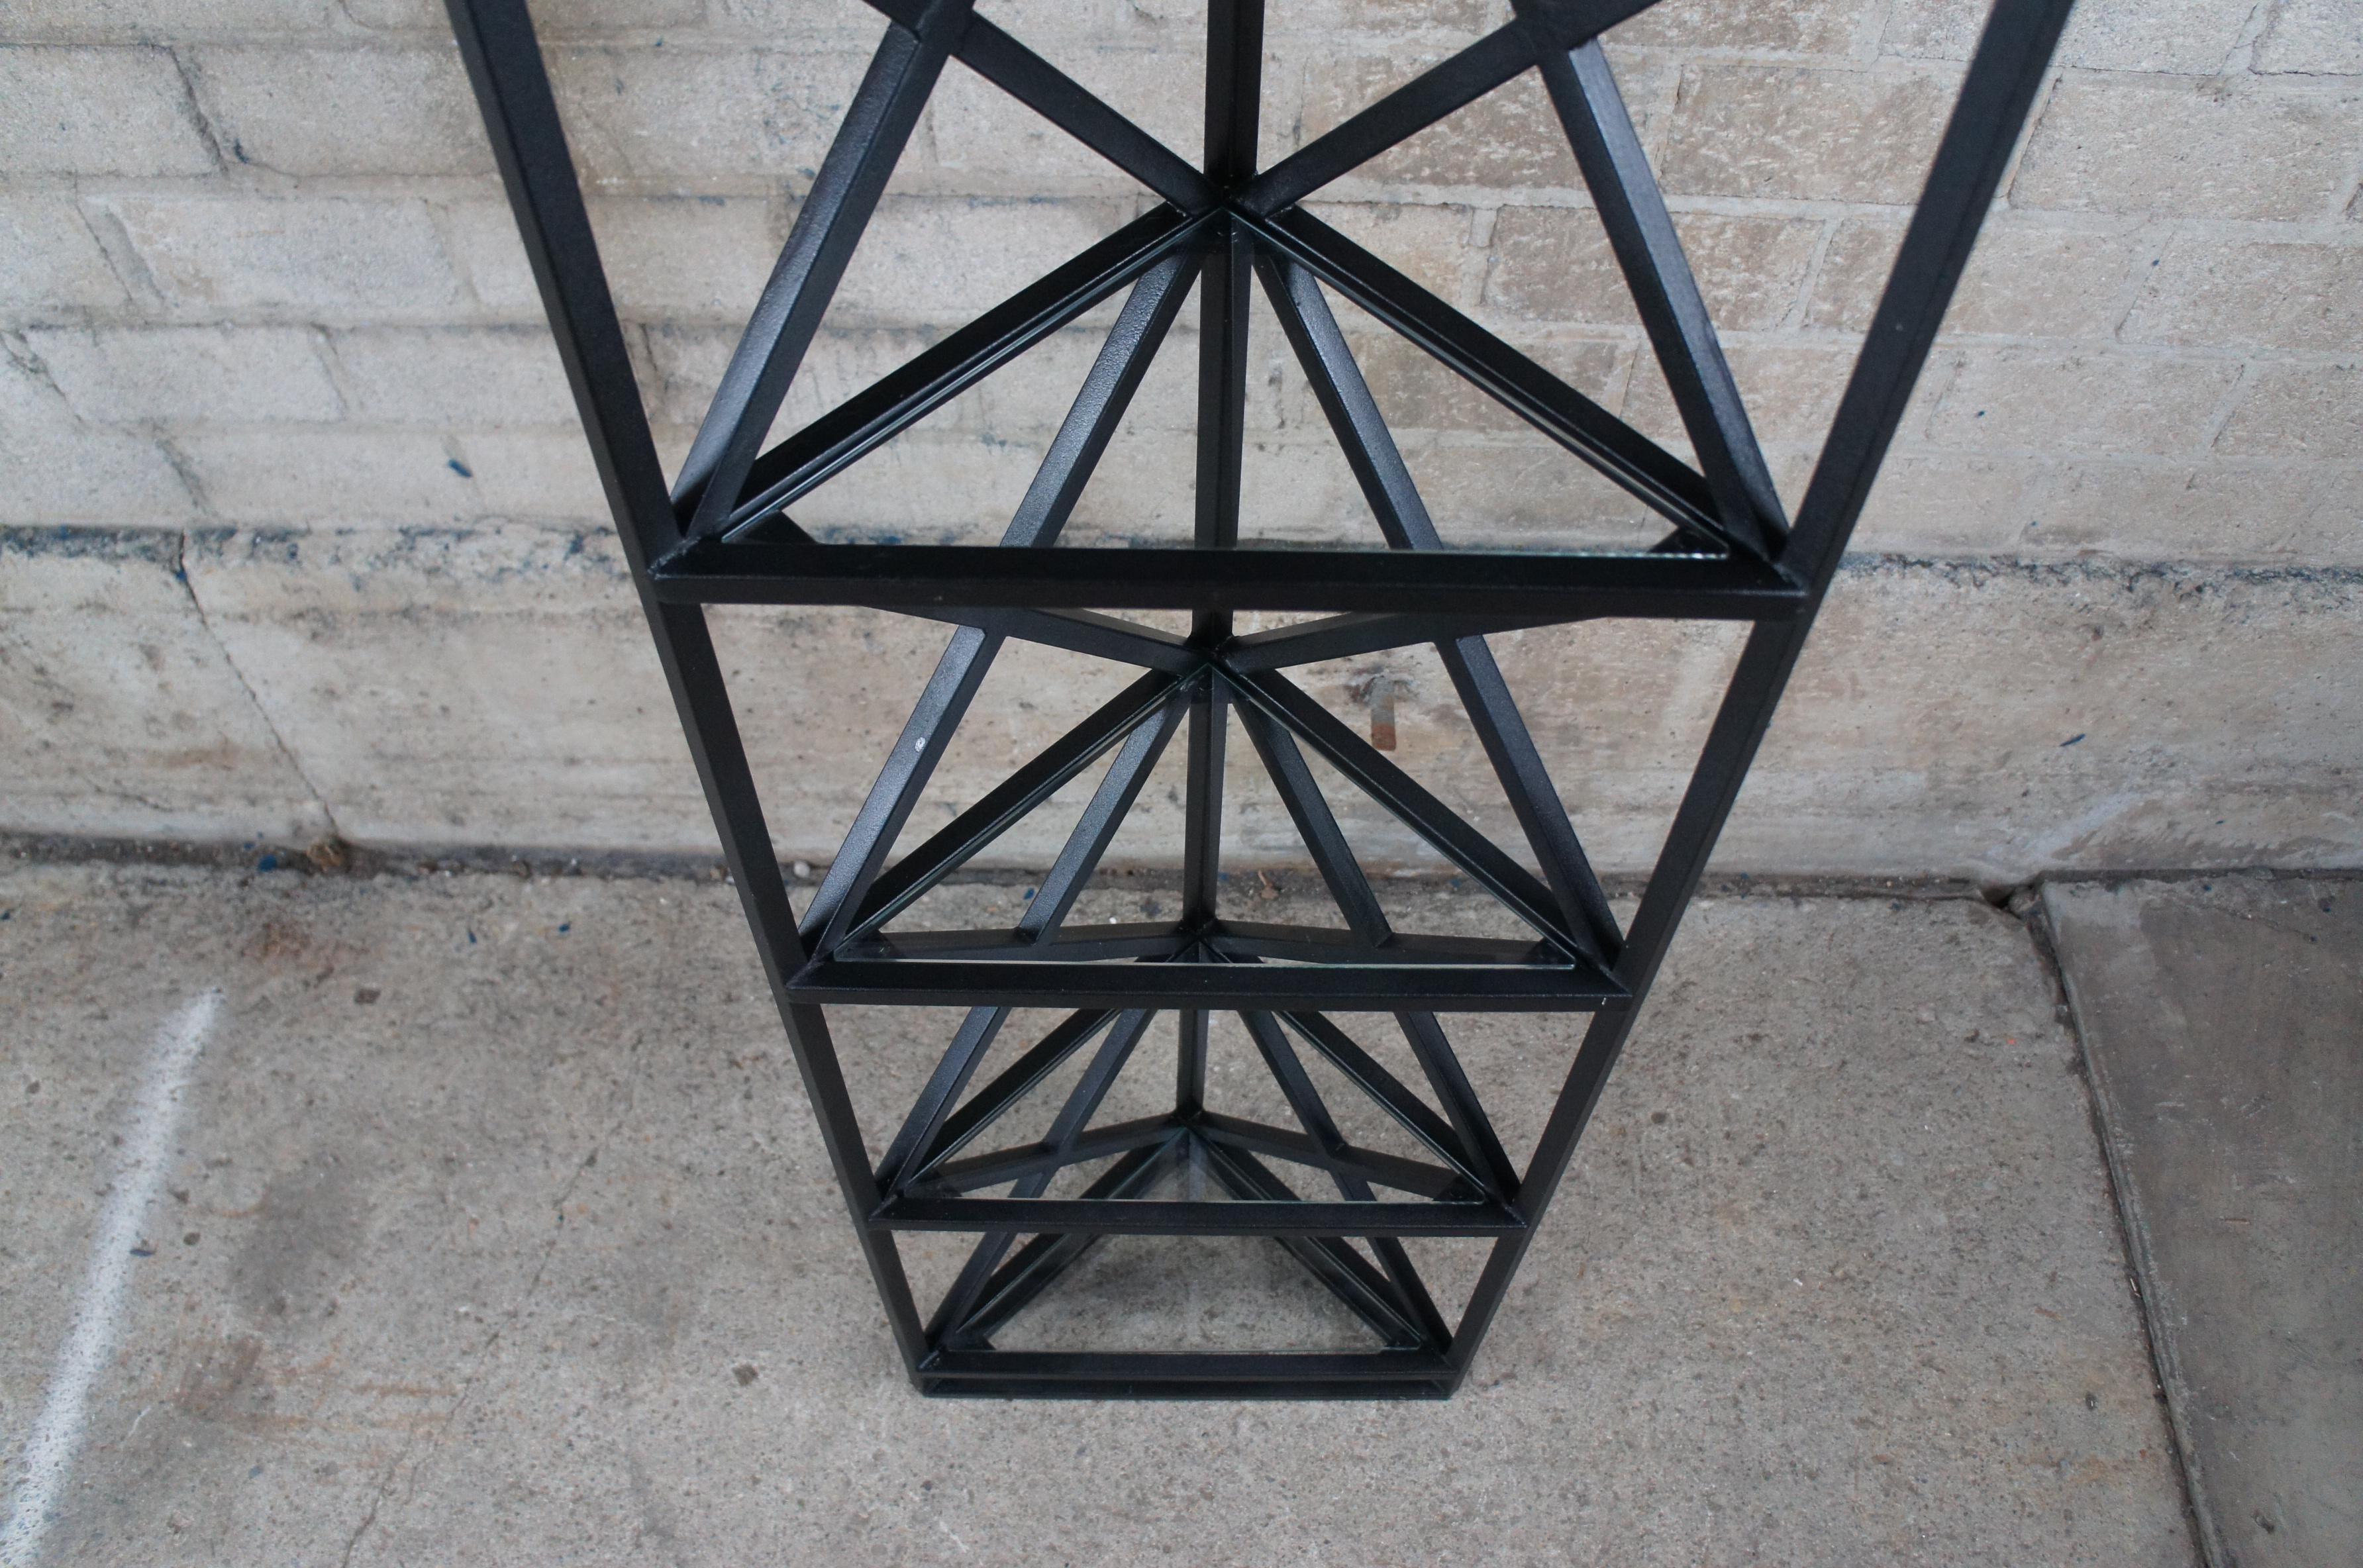 Art Deco Style Geometric Metal & Glass Triangular Corner Shelf Etagere Stand In Good Condition For Sale In Dayton, OH